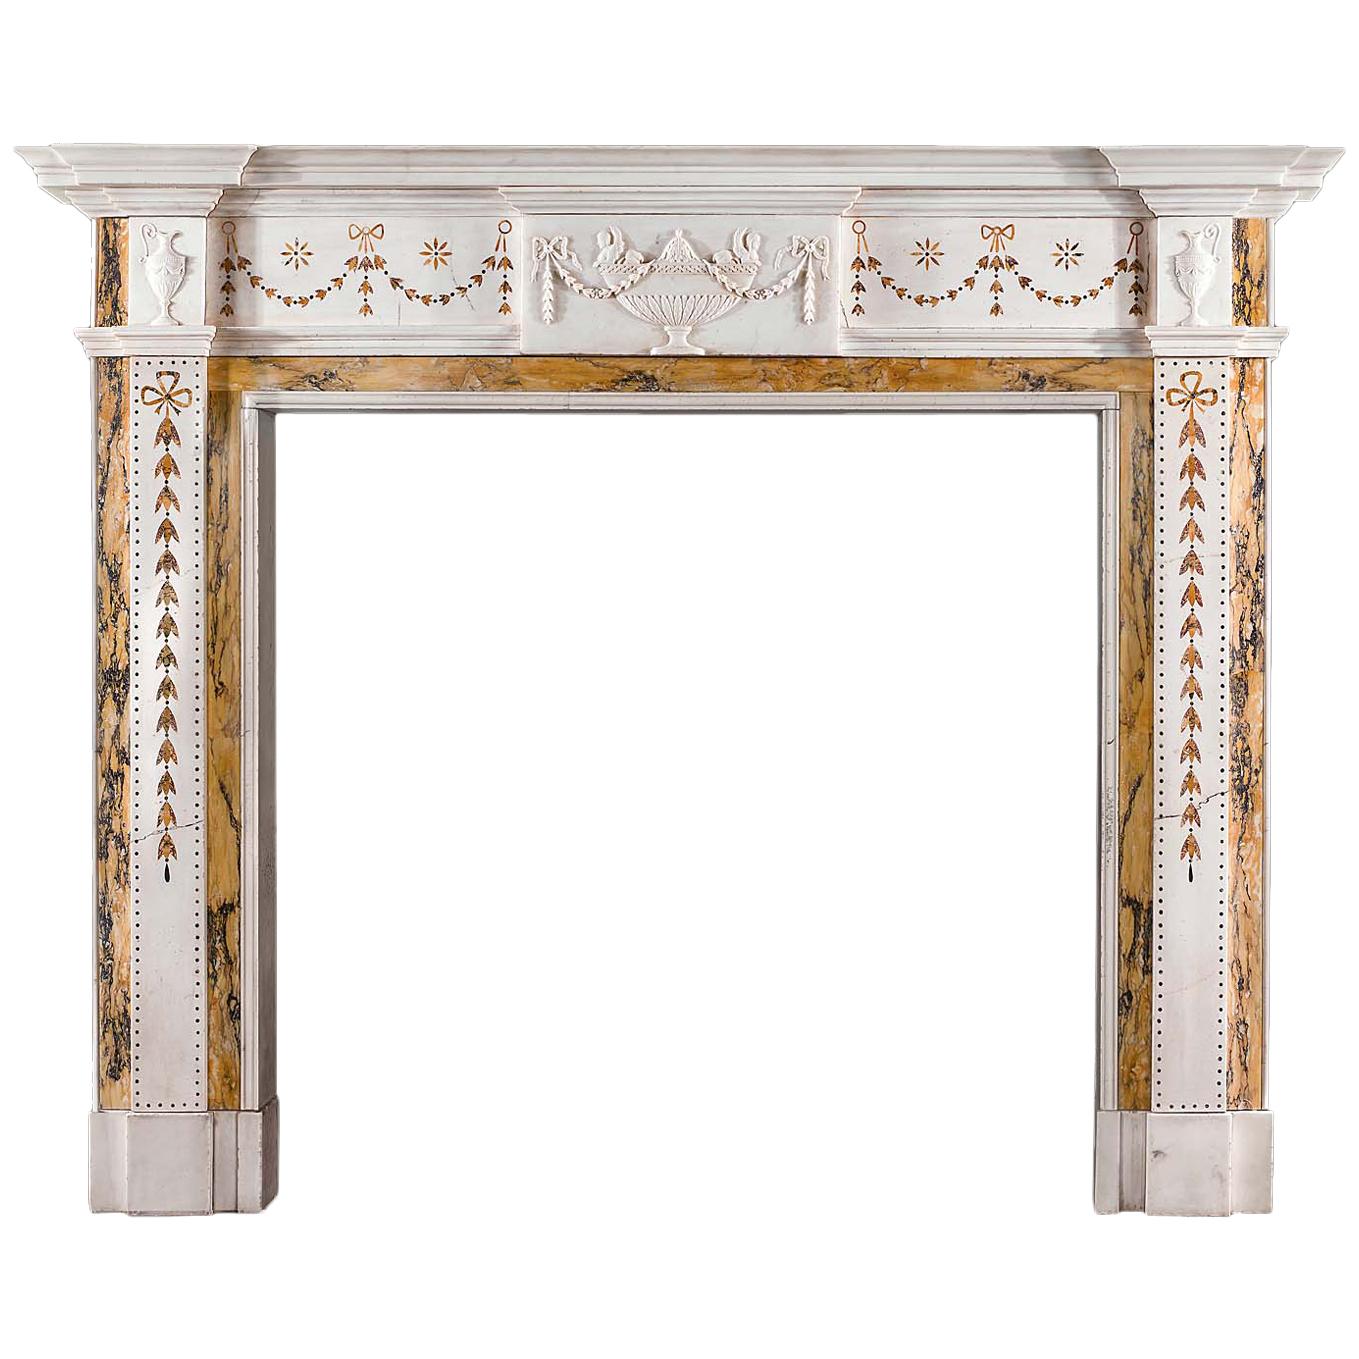 Georgian Style Chimneypiece in Statuary, Sienna and Brocatelle Marble